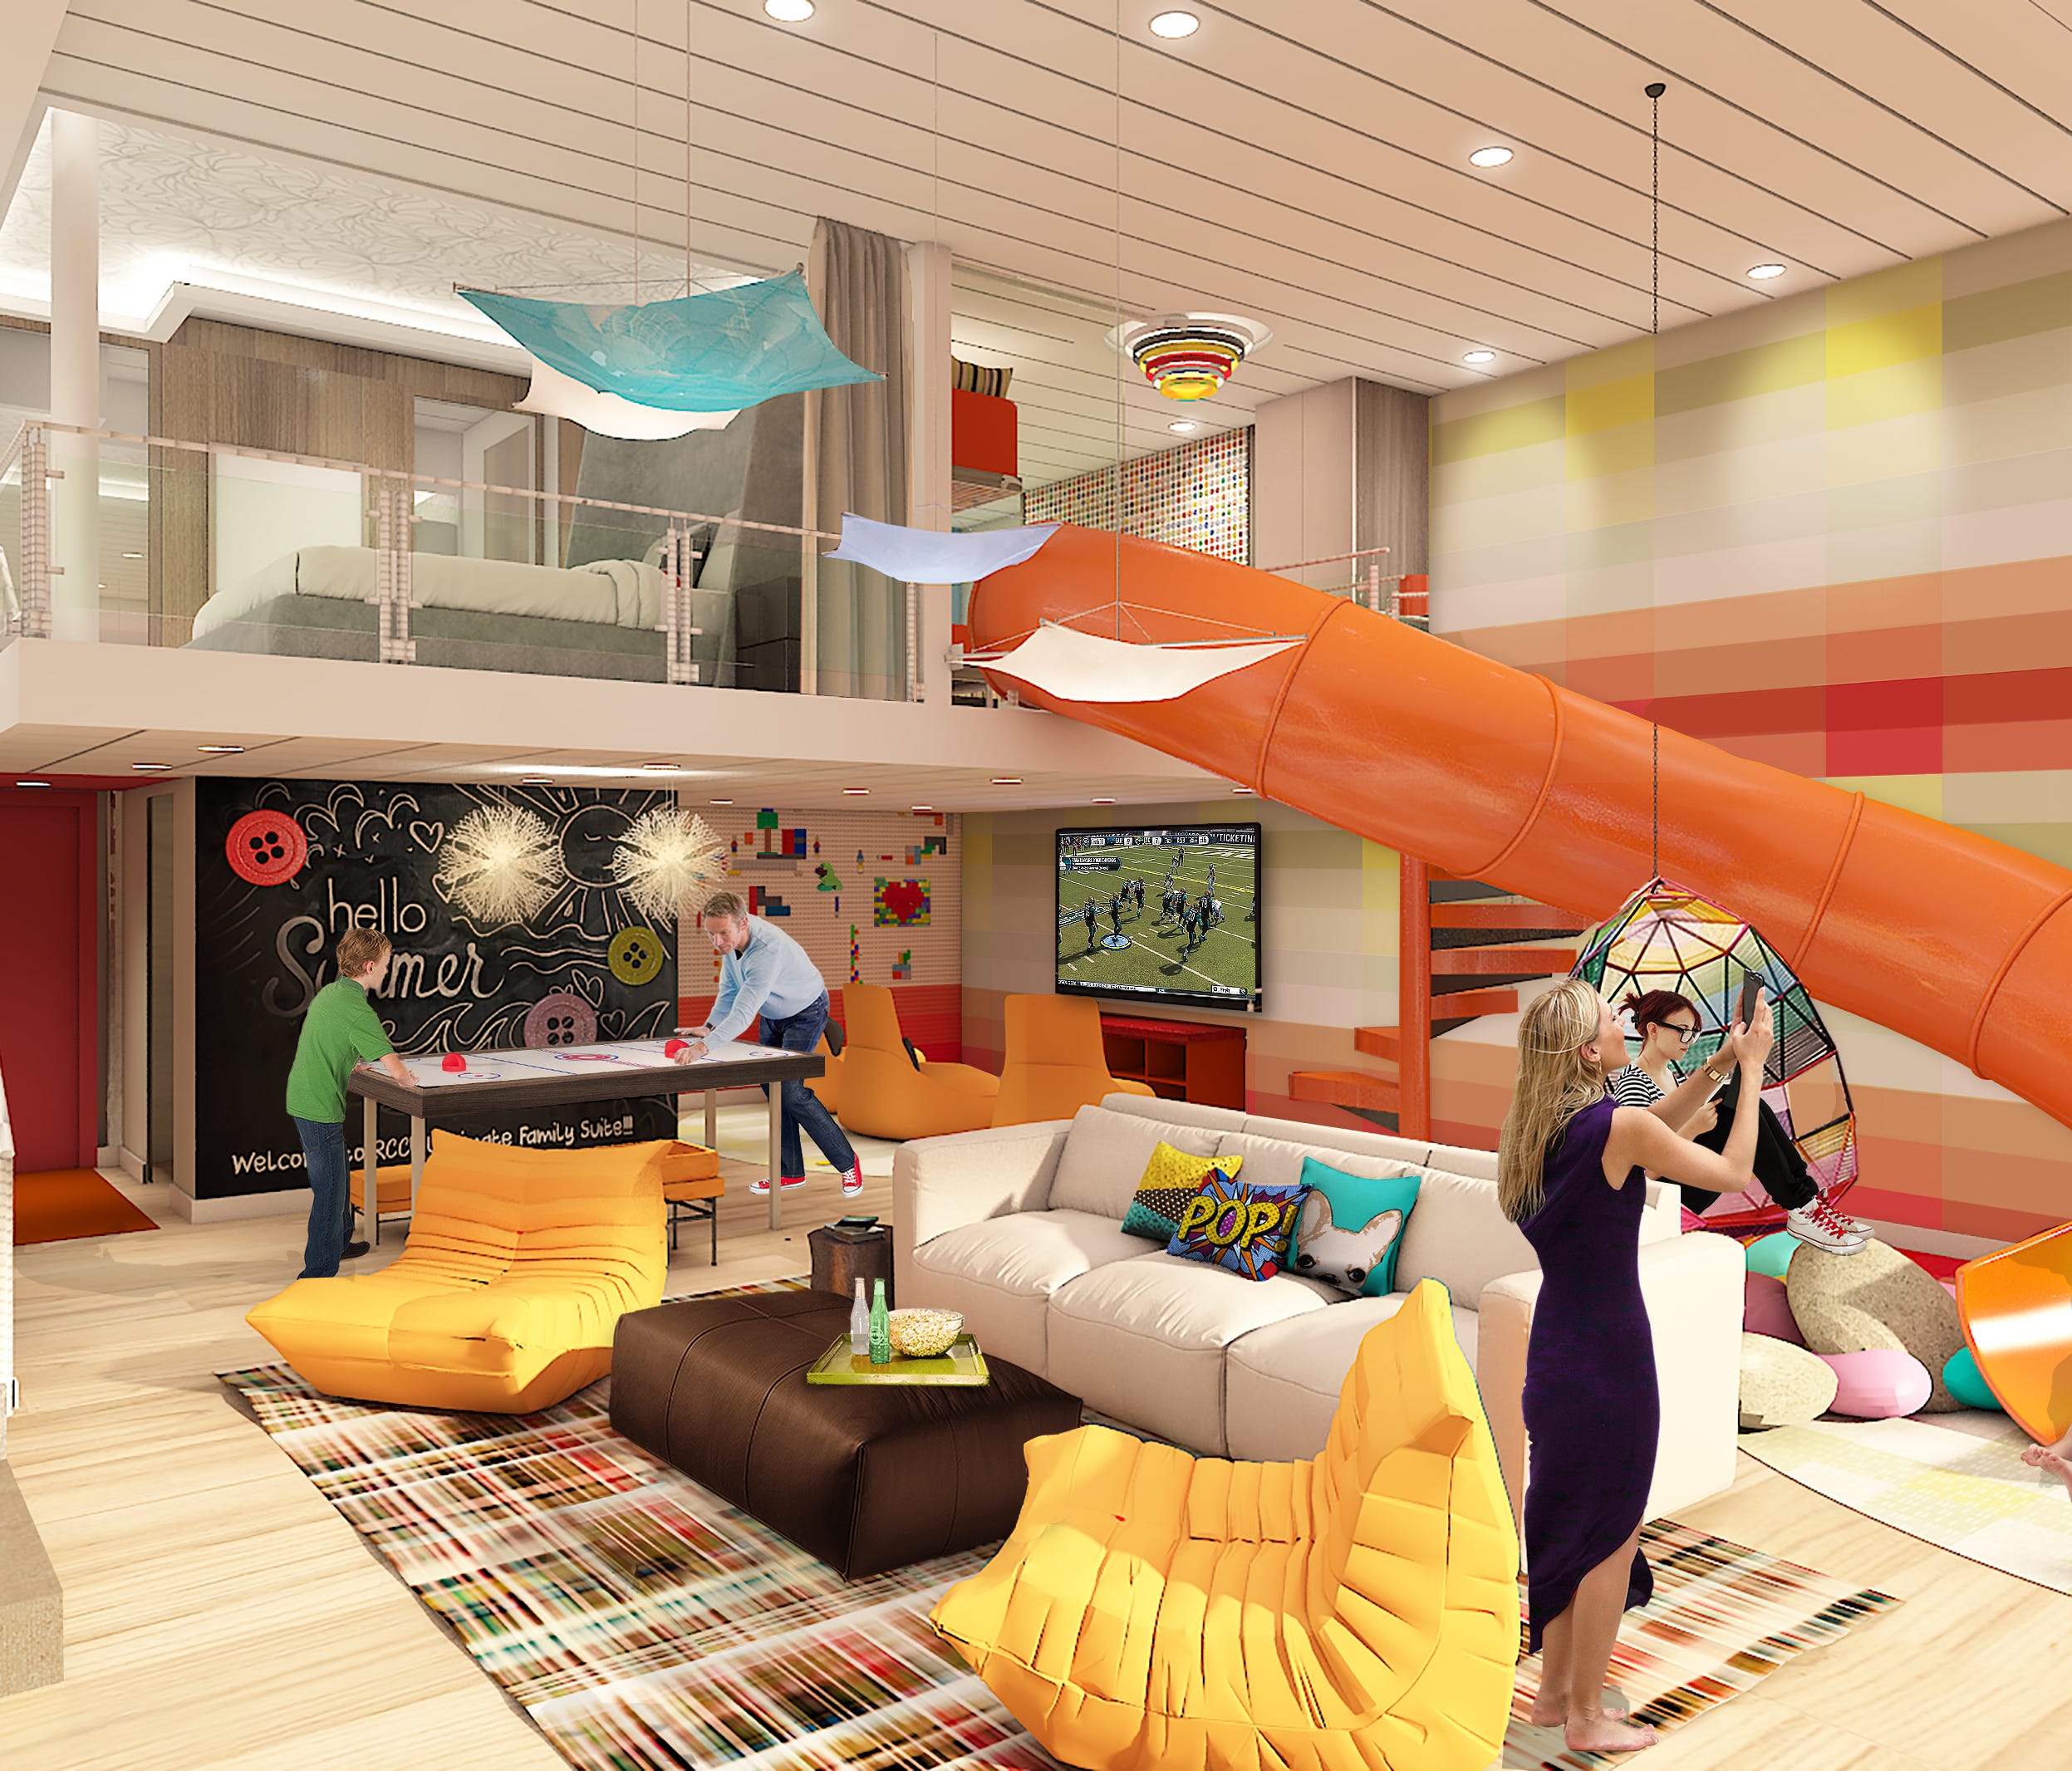 The Ultimate Family Suite planned for Royal Caribbean's Symphony of the Seas.